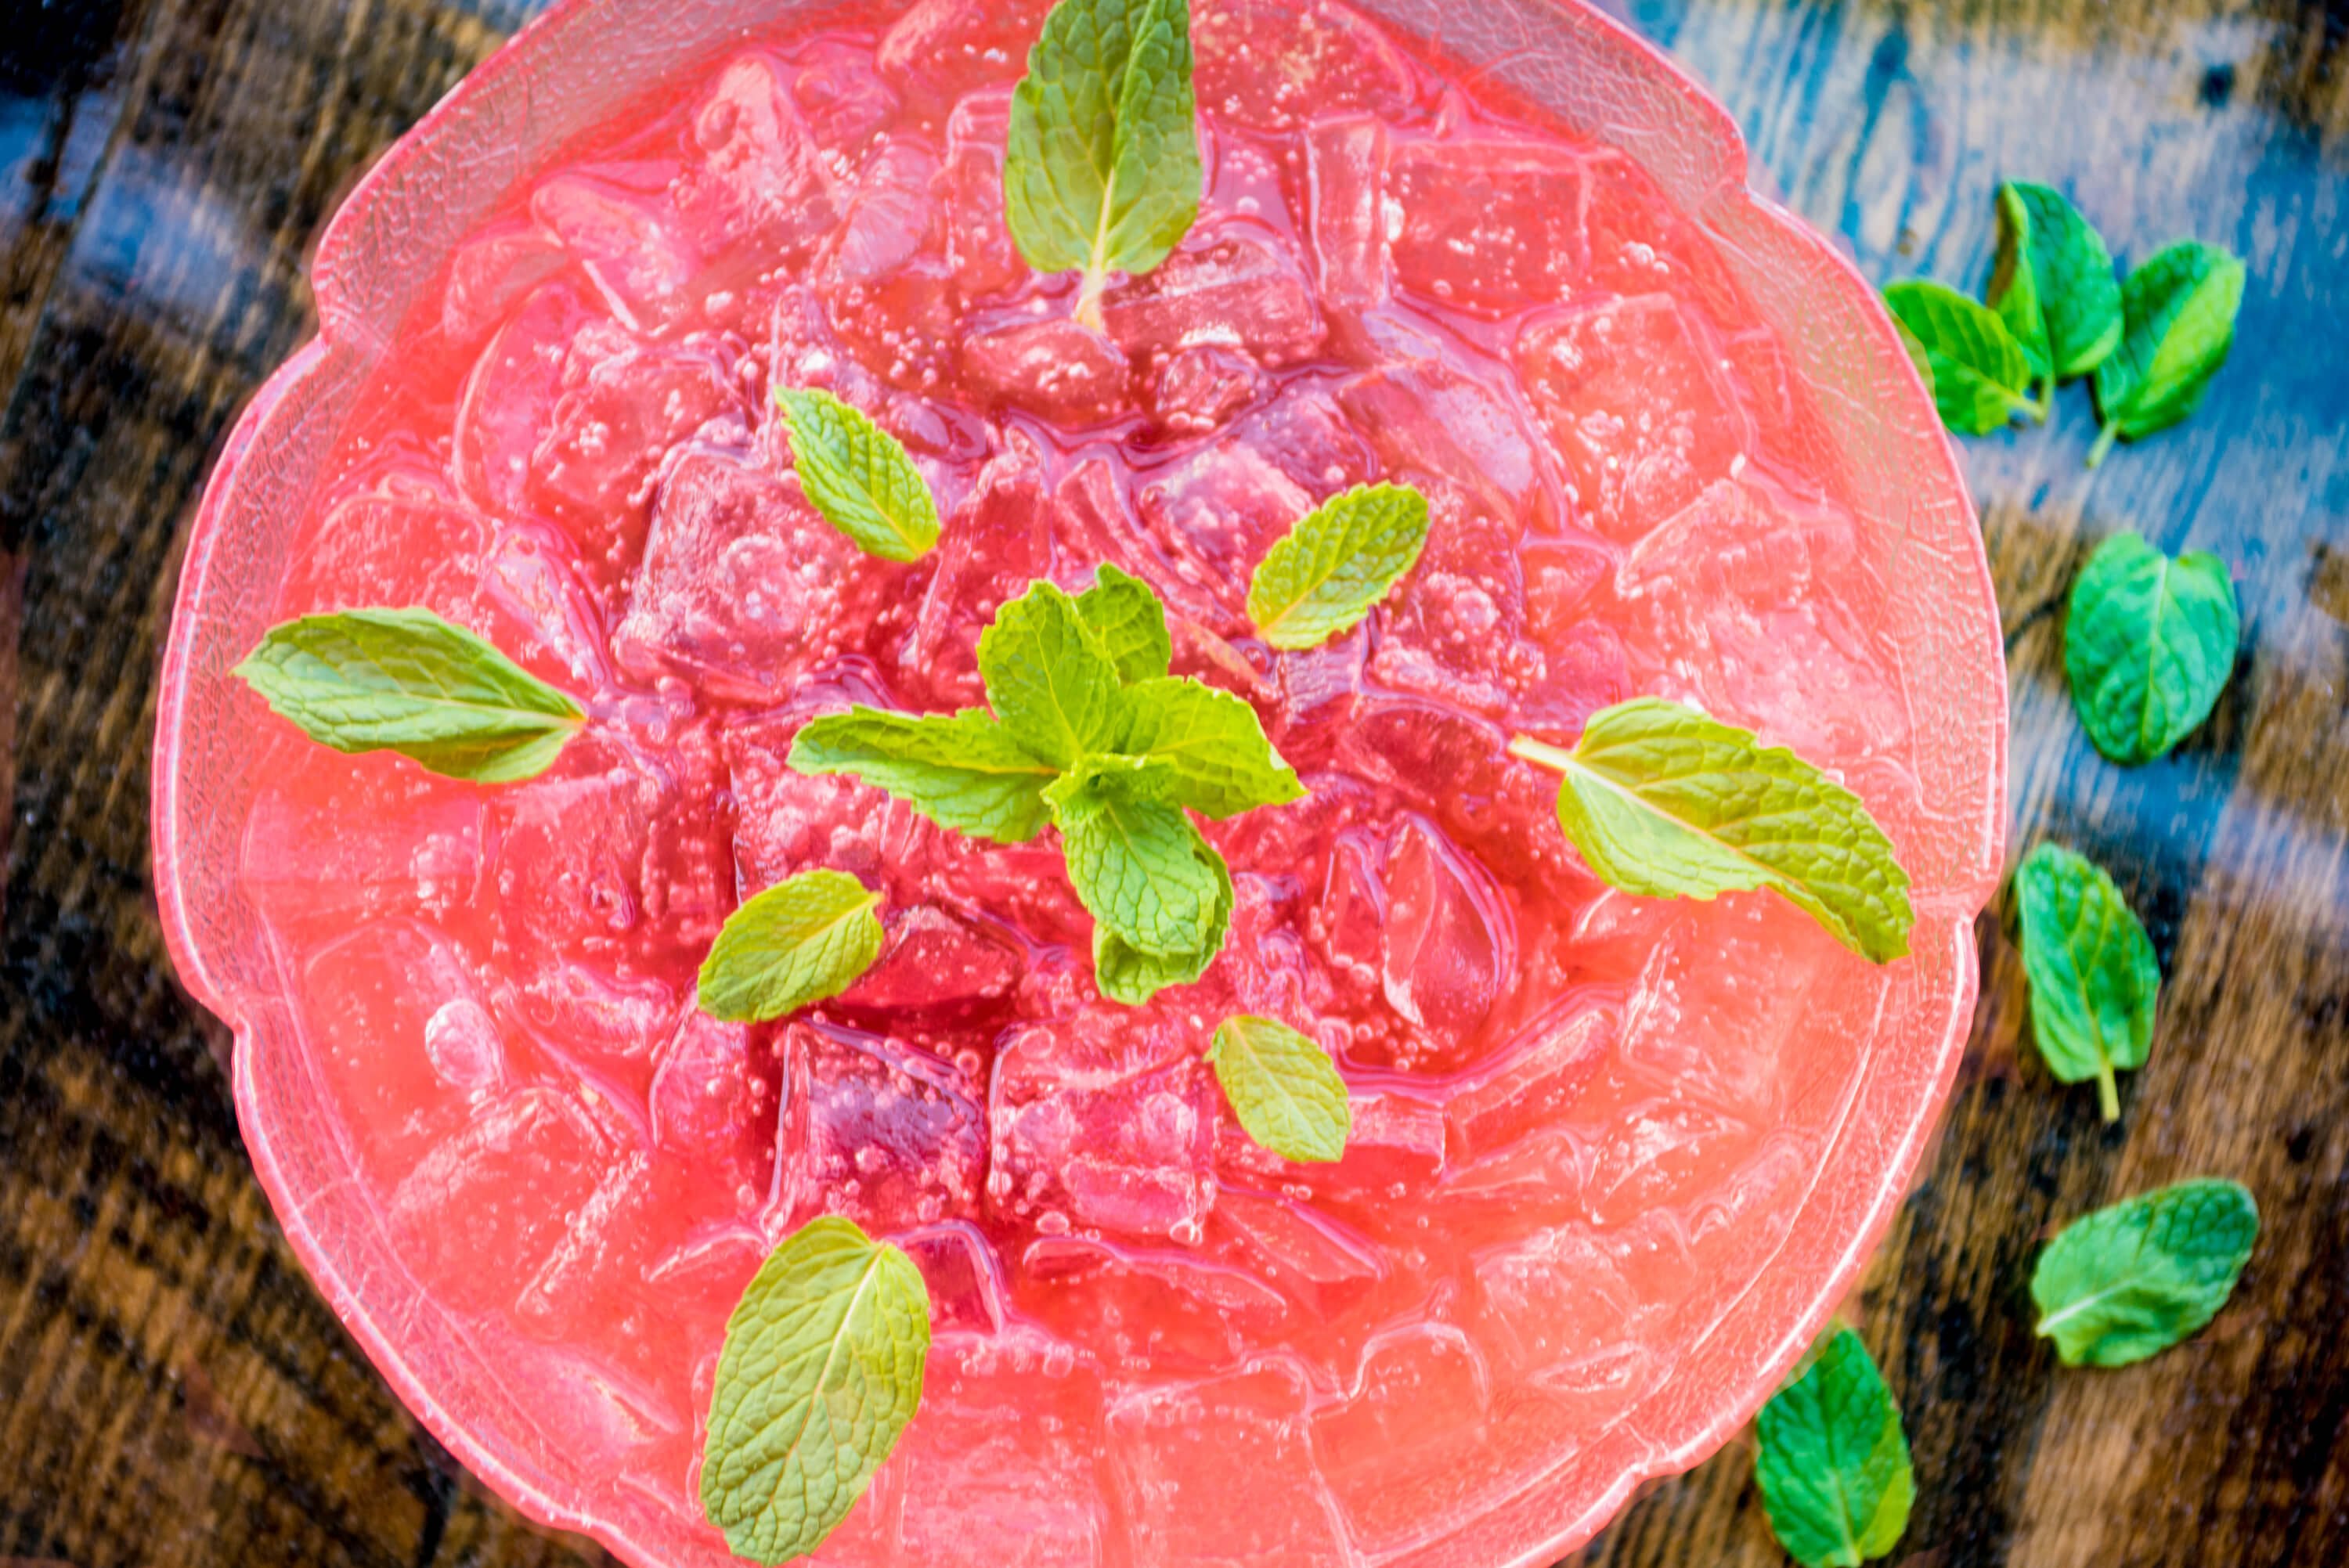 Punch Bowl Social Watermelon Polo Punch - Memorial Day 2017 punch bowl recipes